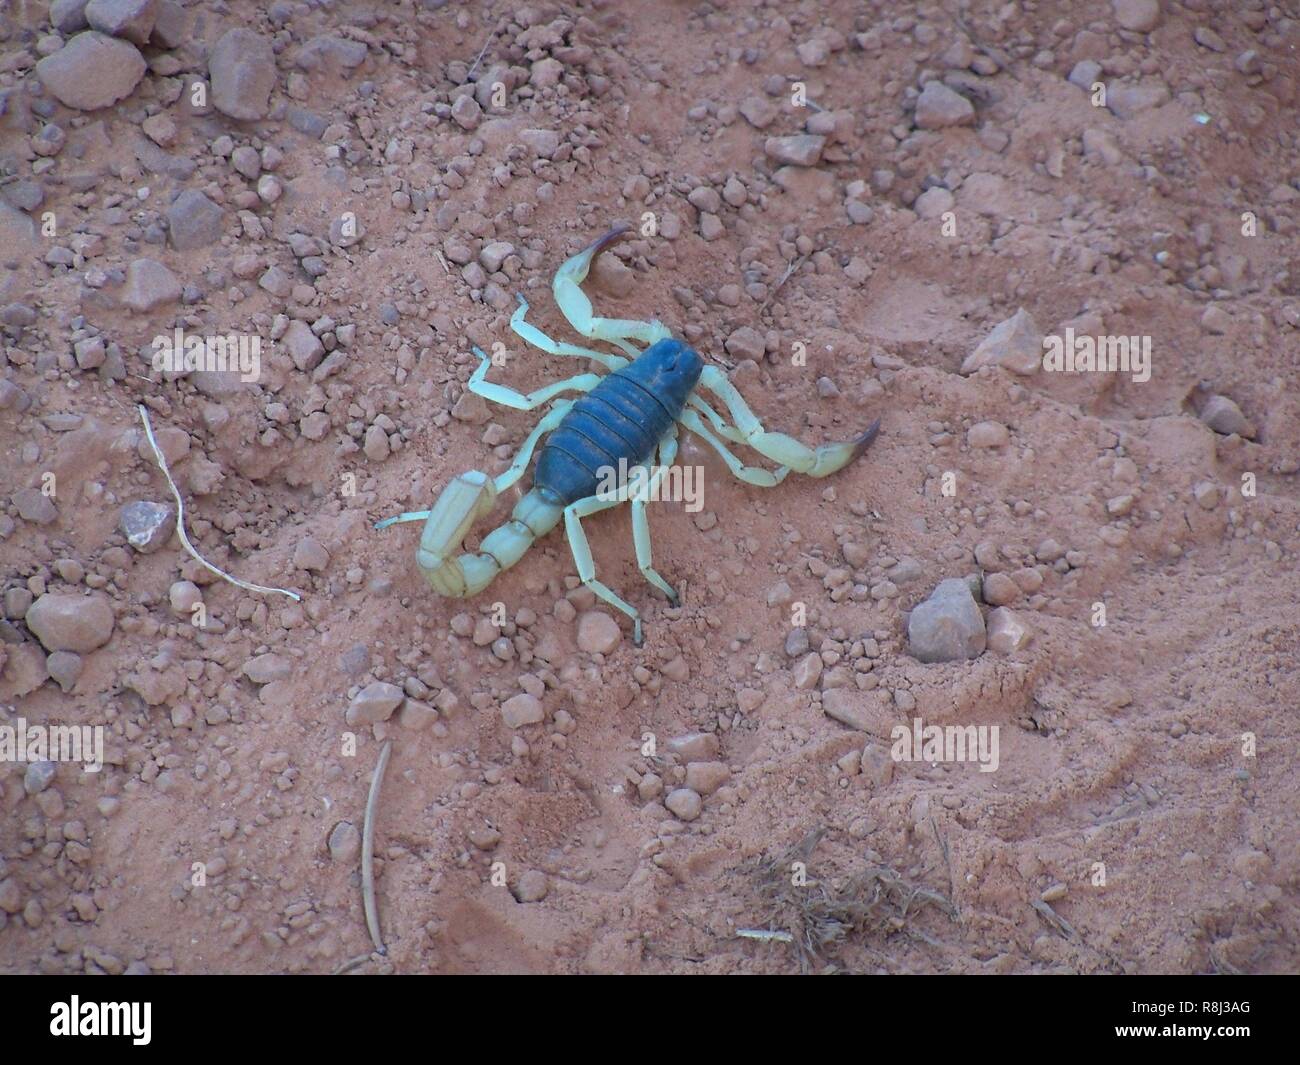 Scorpion in the Grand Canyon Stock Photo